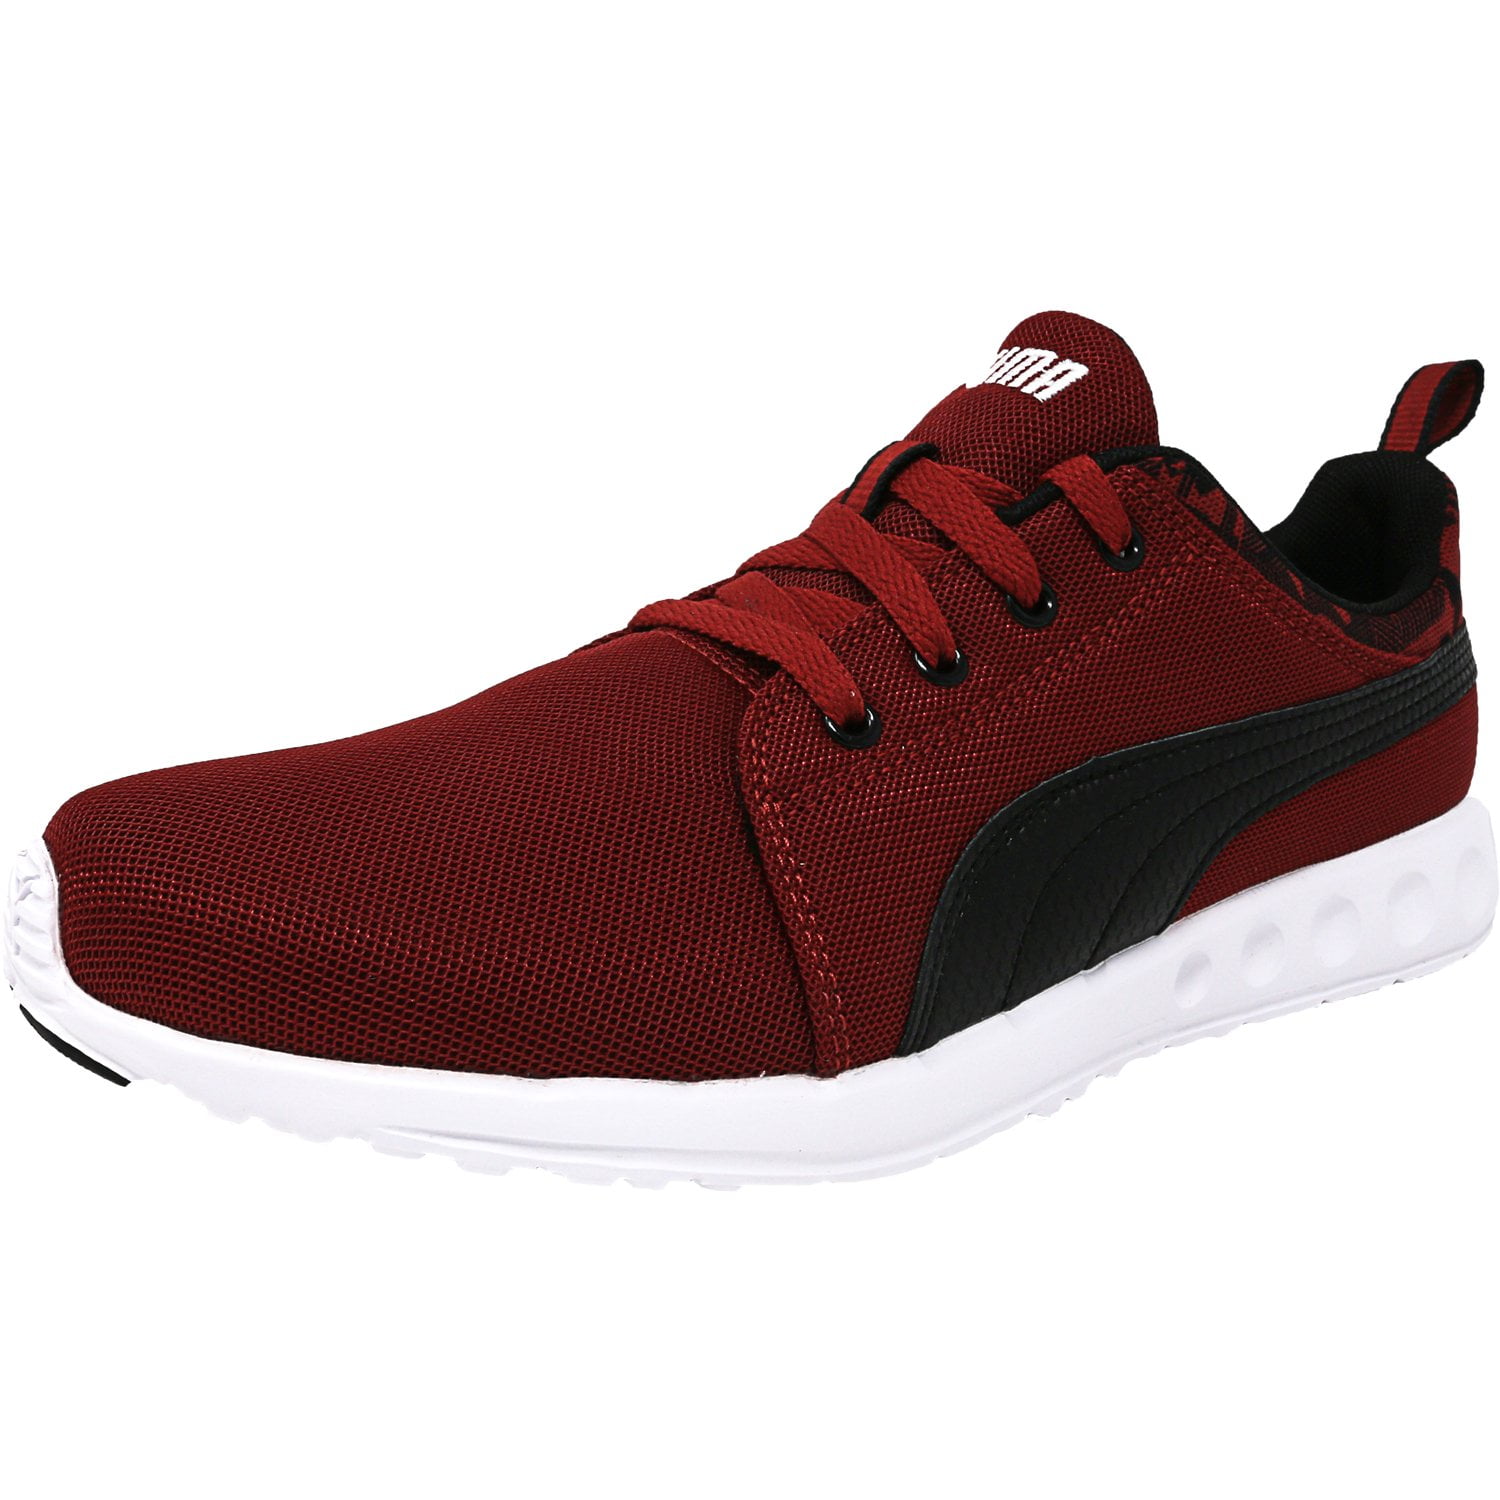 puma carson runner red and black